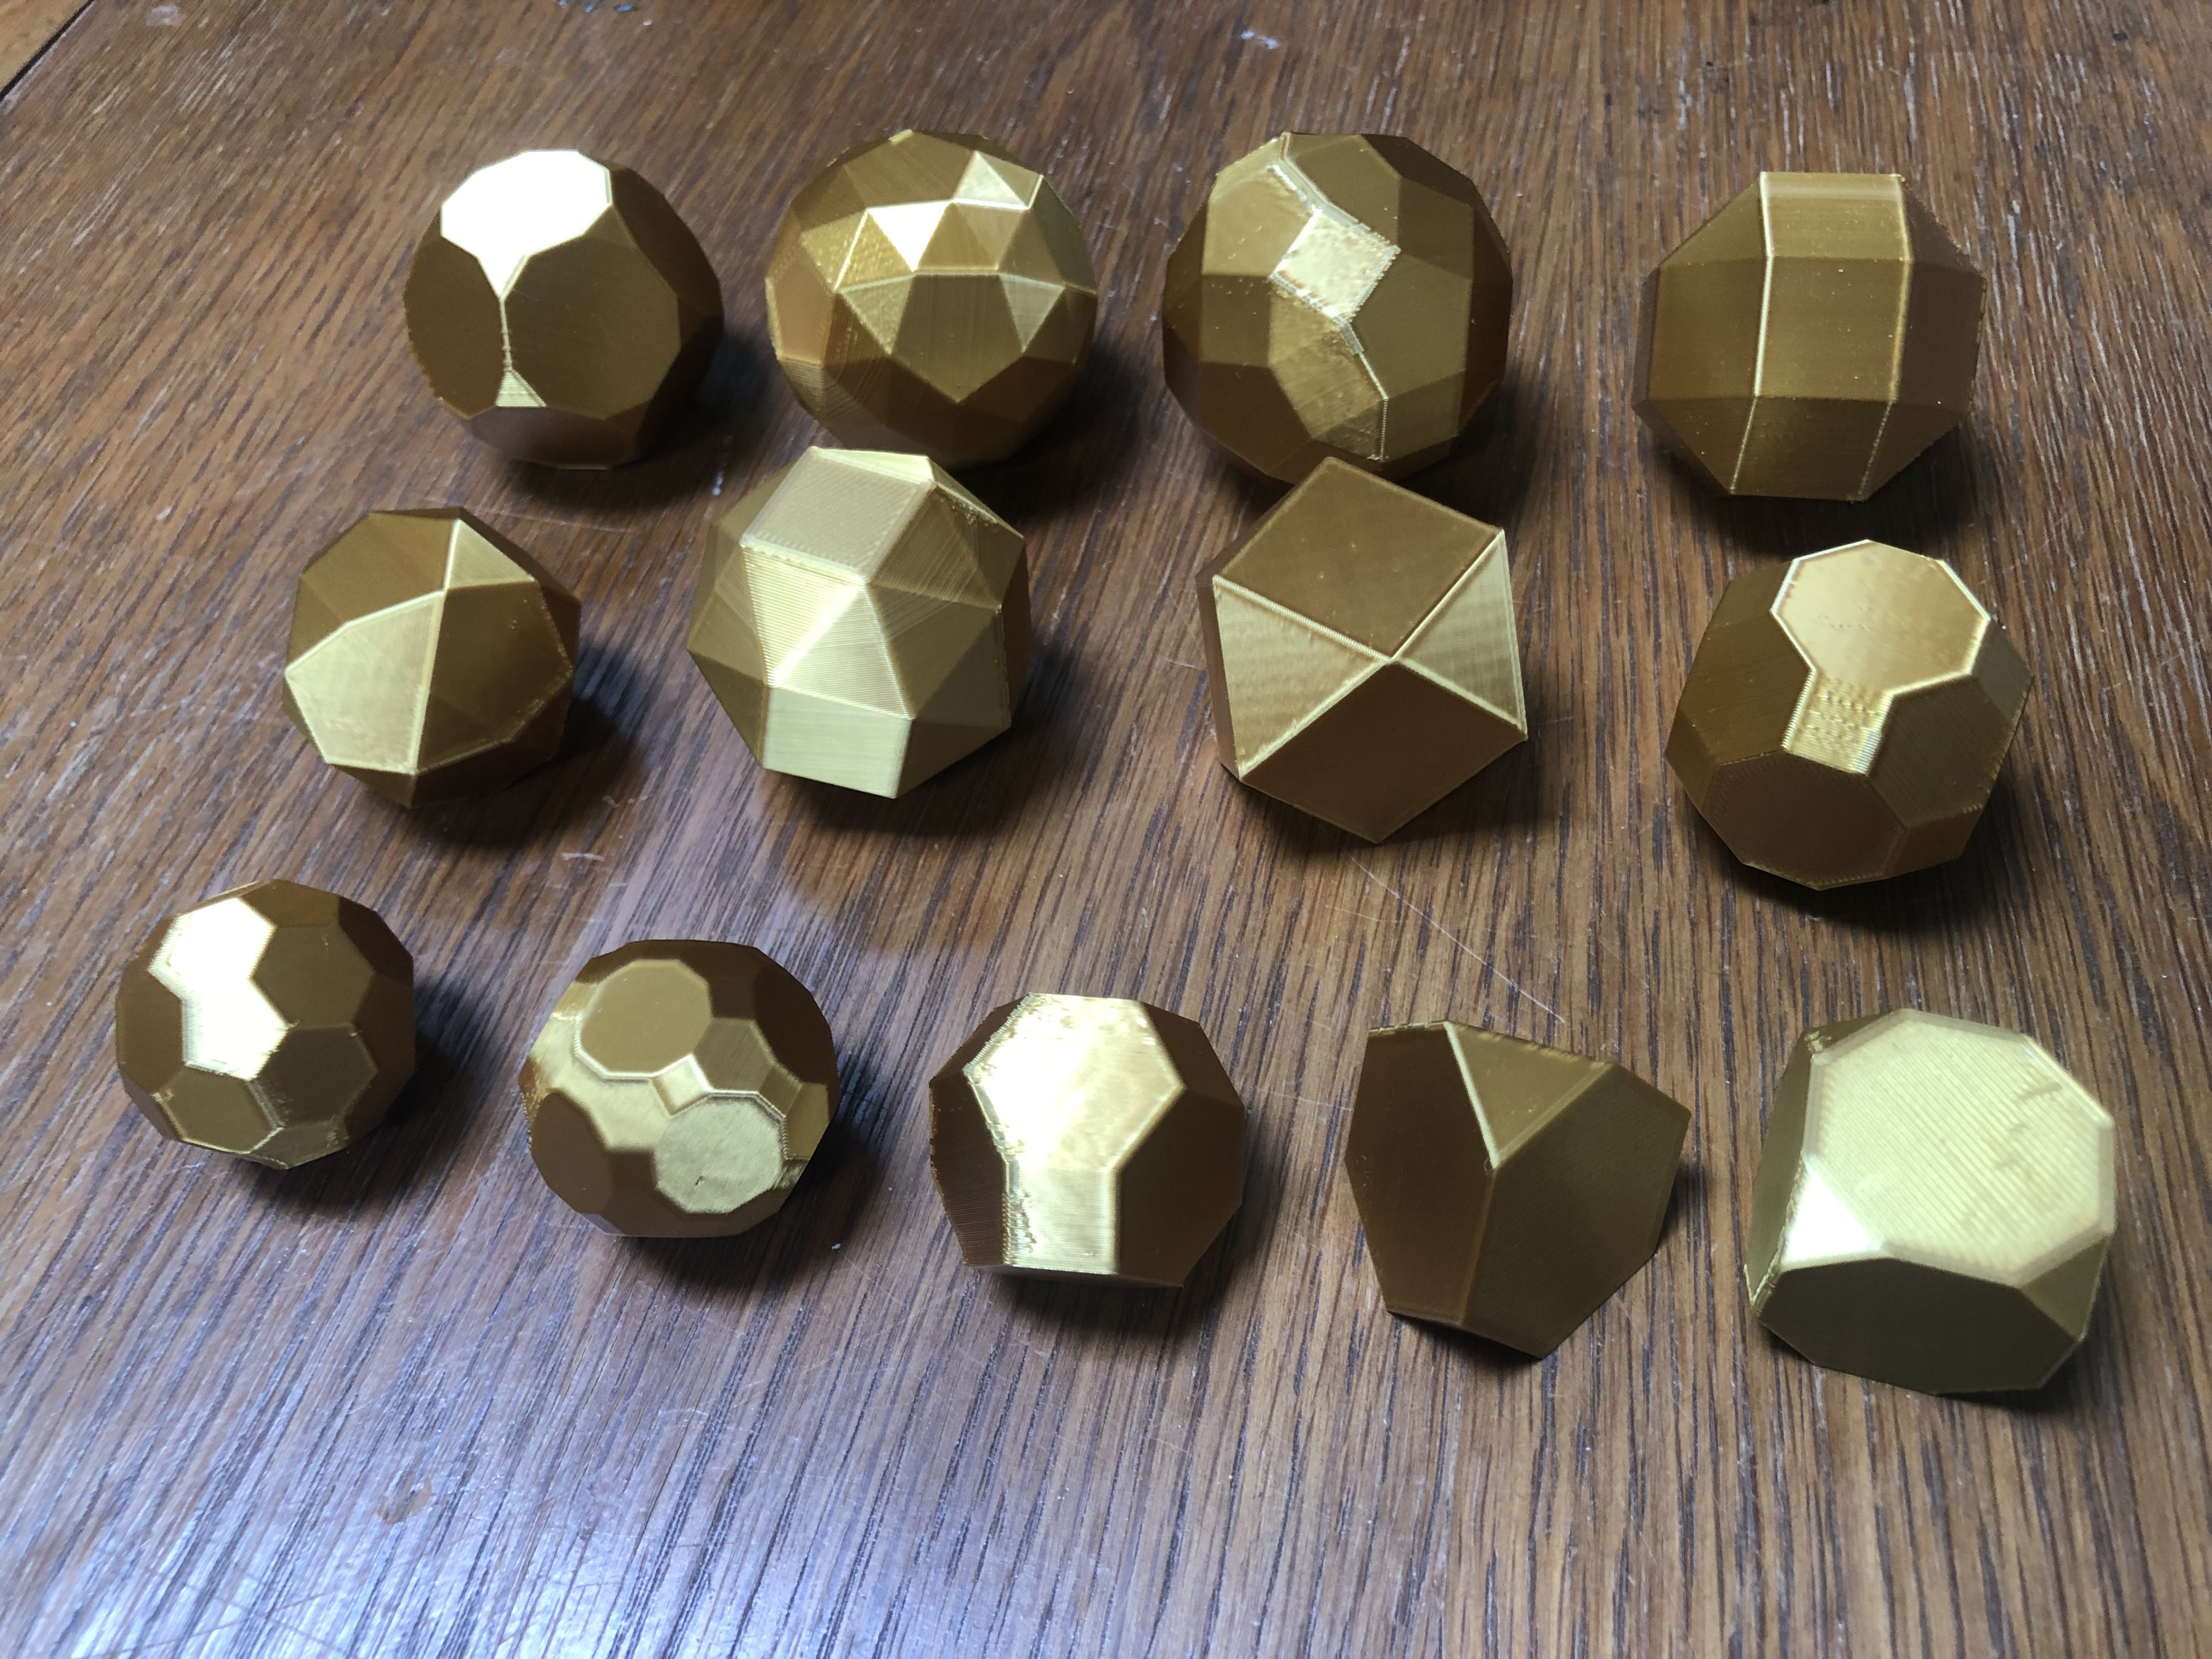 Archimedean Solids